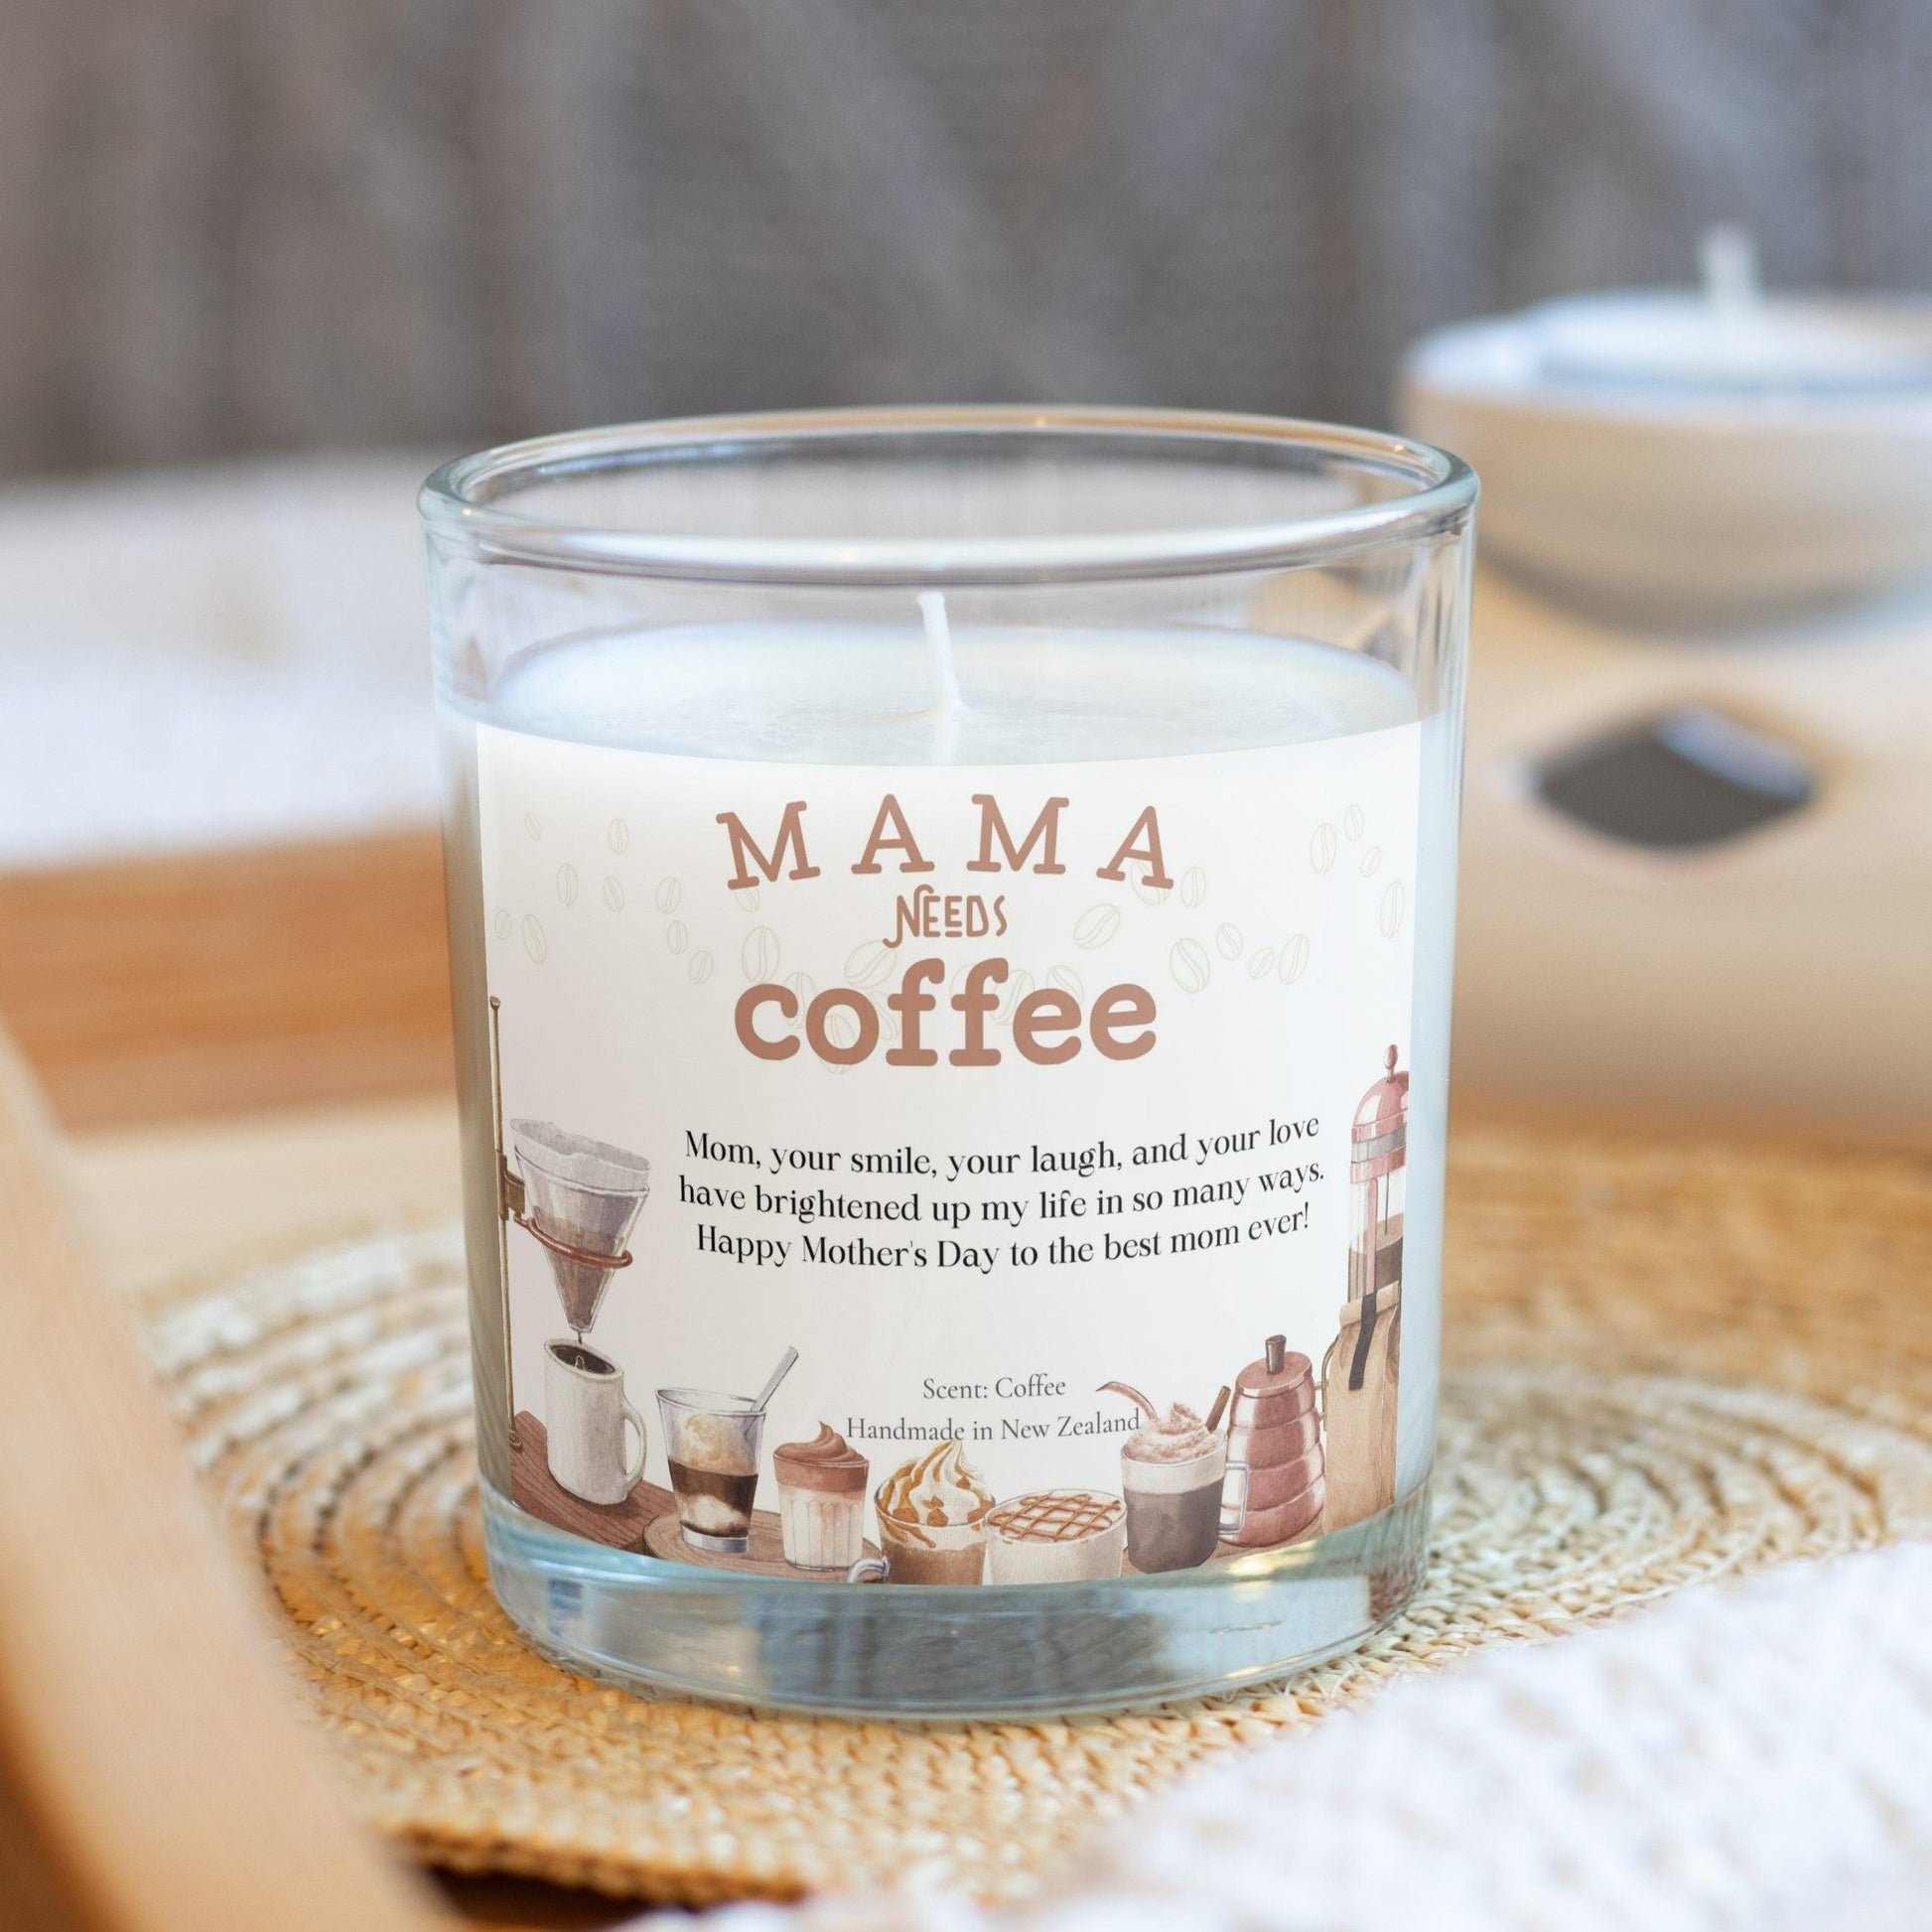 happy mother's day, gift for mom, mama needs coffee, coffee, mom, personalized gift, customized gift, special gift for mom, unique gift